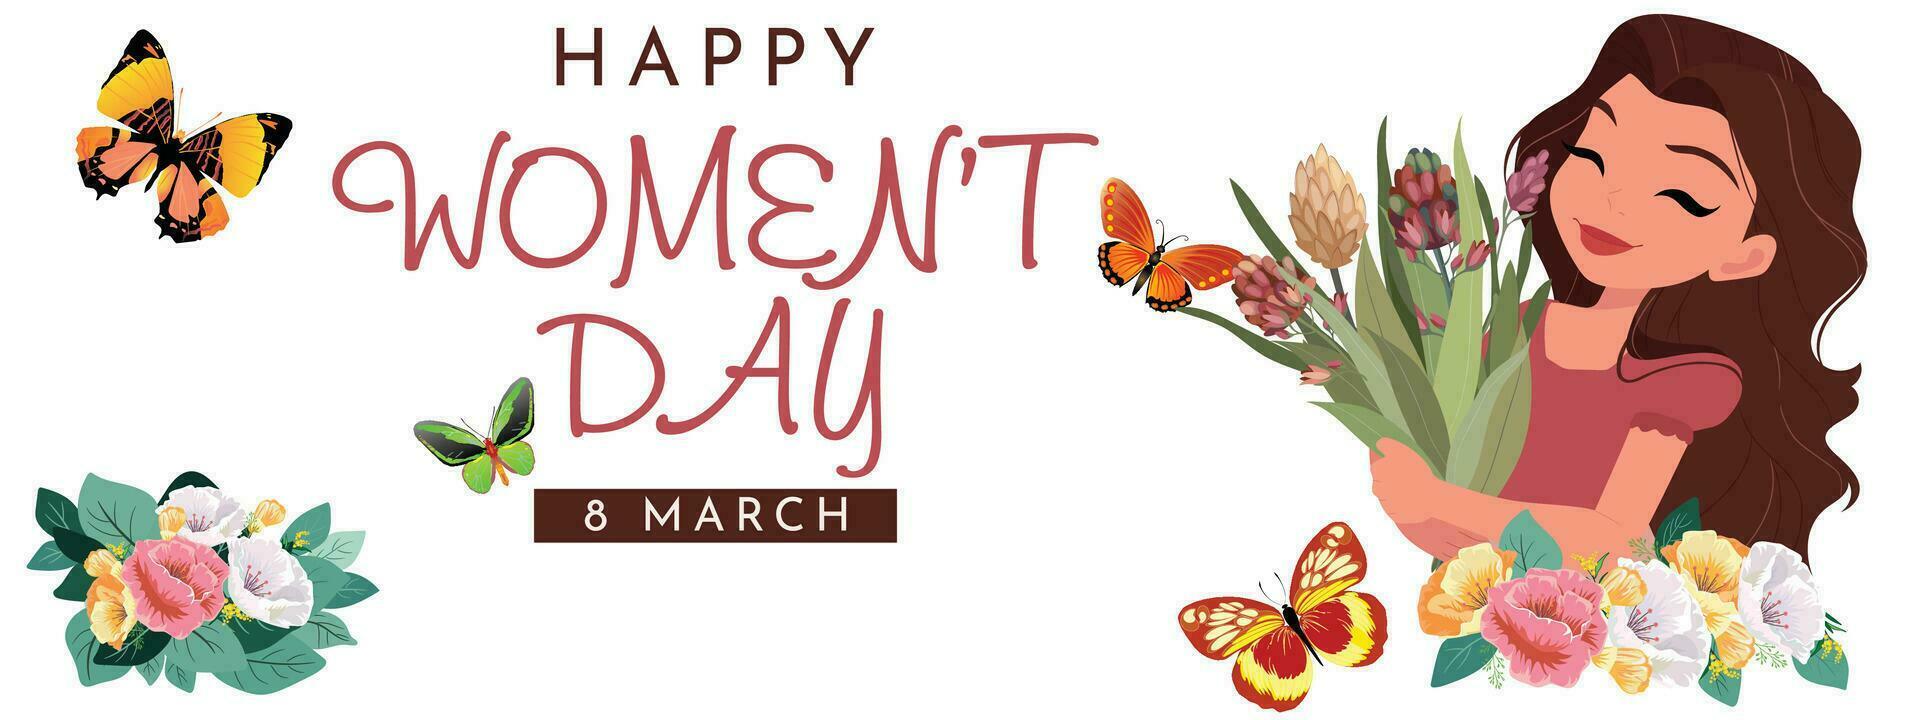 International Women's Day March 8 with frame of woman hugging flowers and butterflies flying, Flat illustration of woman. Concept of women loving themselves. vector